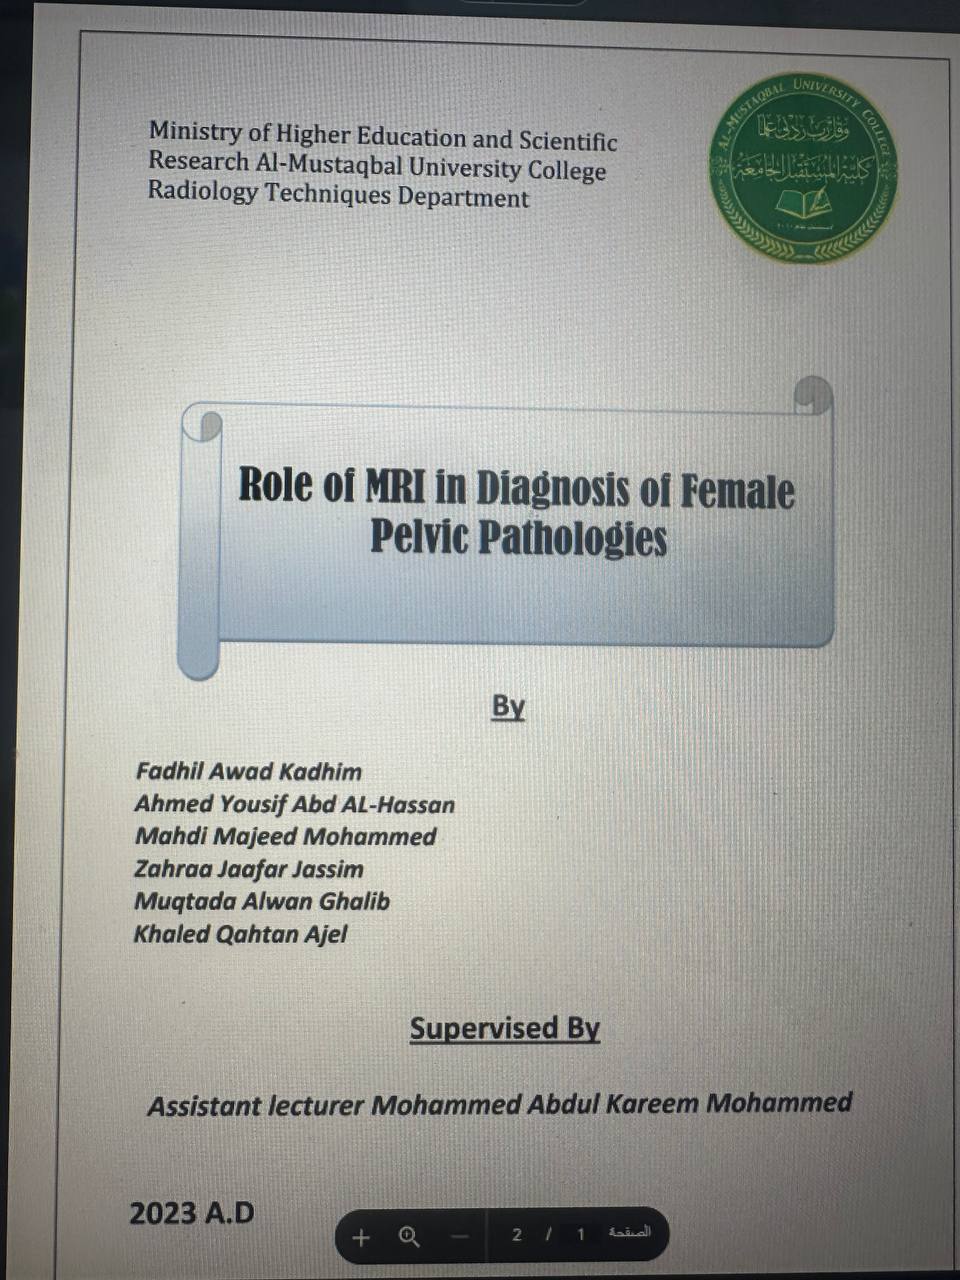  Role of MRI in Diagnosis of Some Female